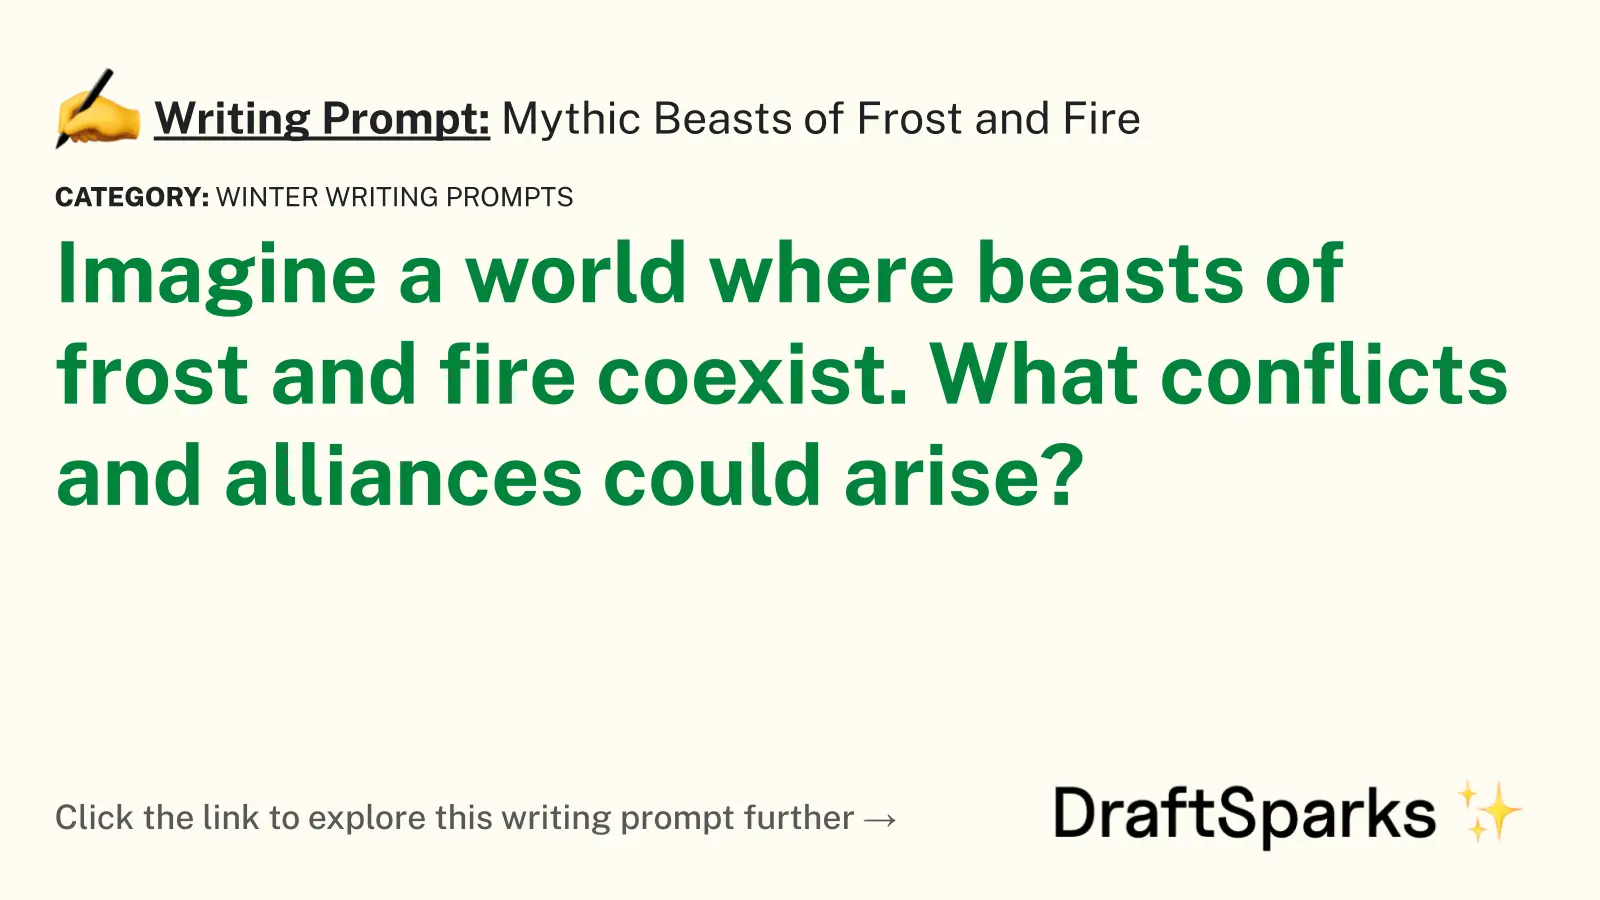 Mythic Beasts of Frost and Fire